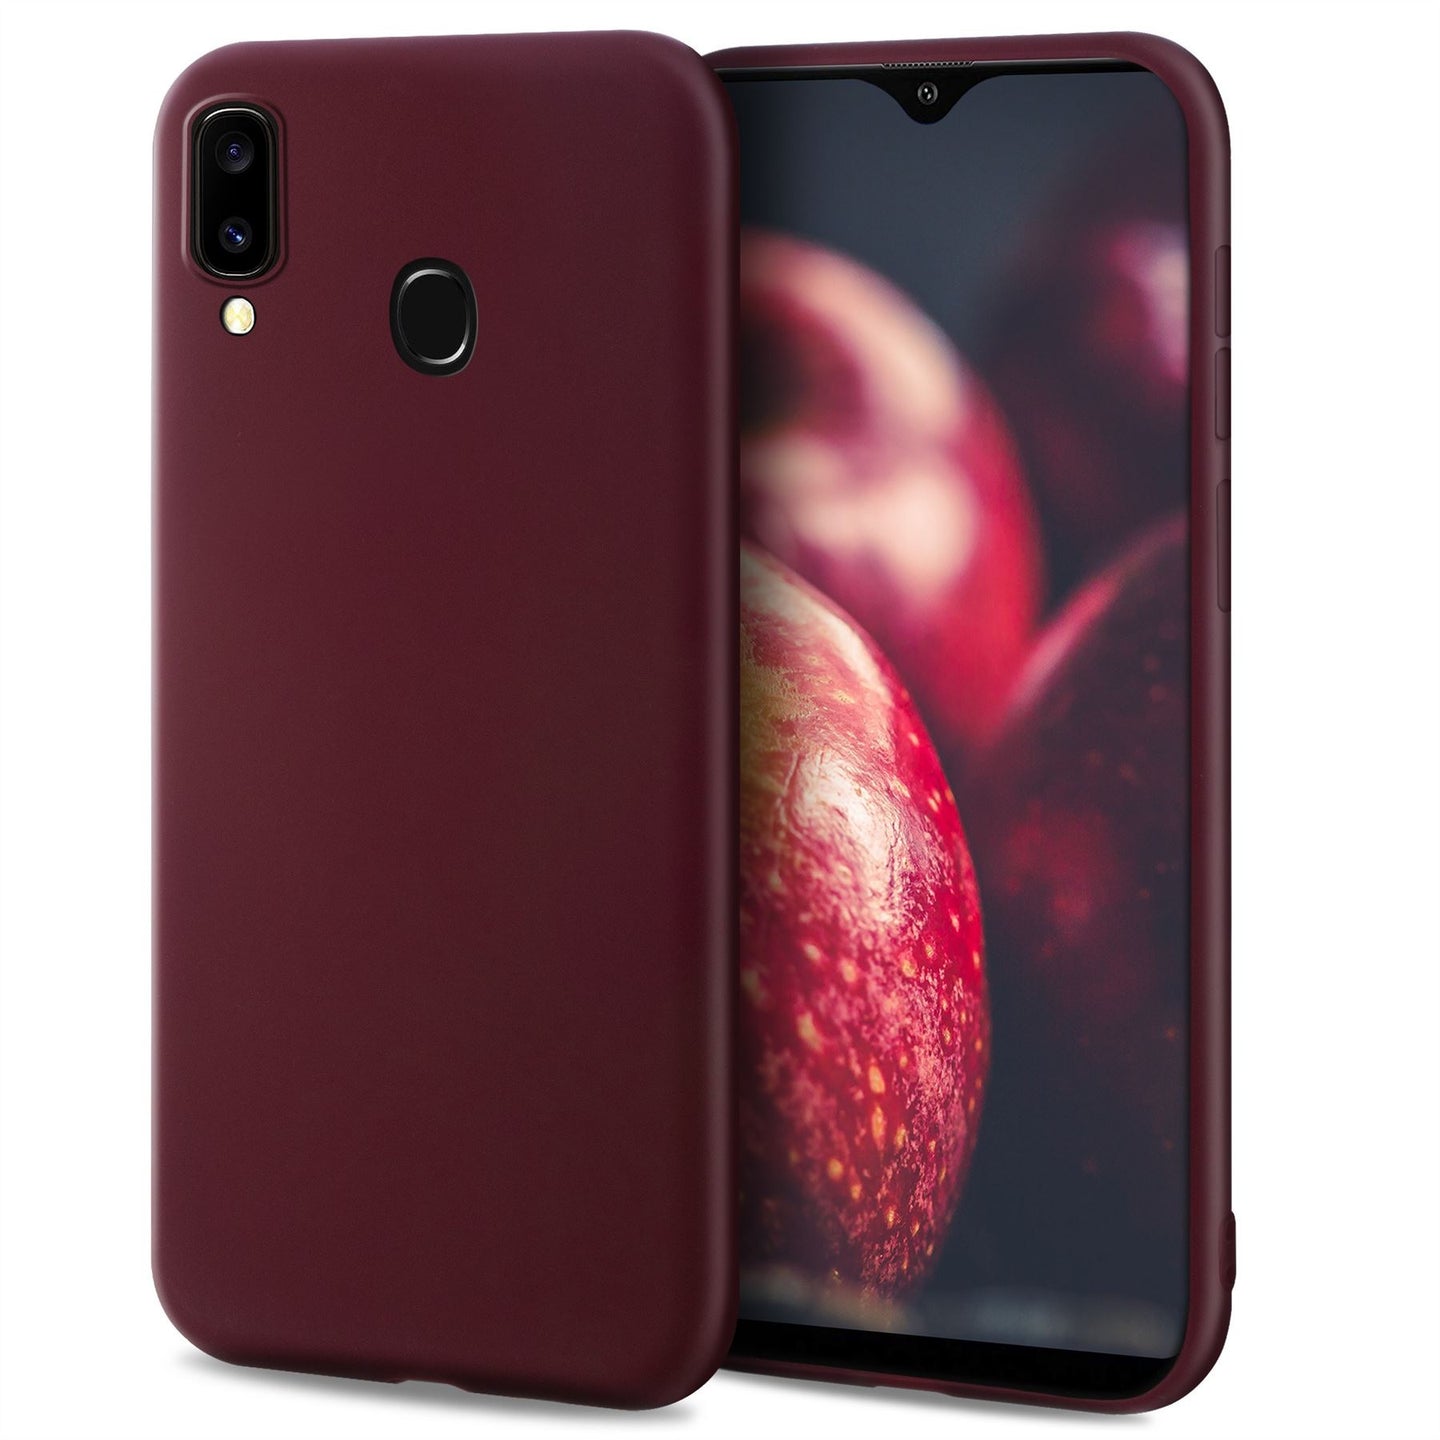 Moozy Minimalist Series Silicone Case for Samsung A40, Wine Red - Matte Finish Slim Soft TPU Cover